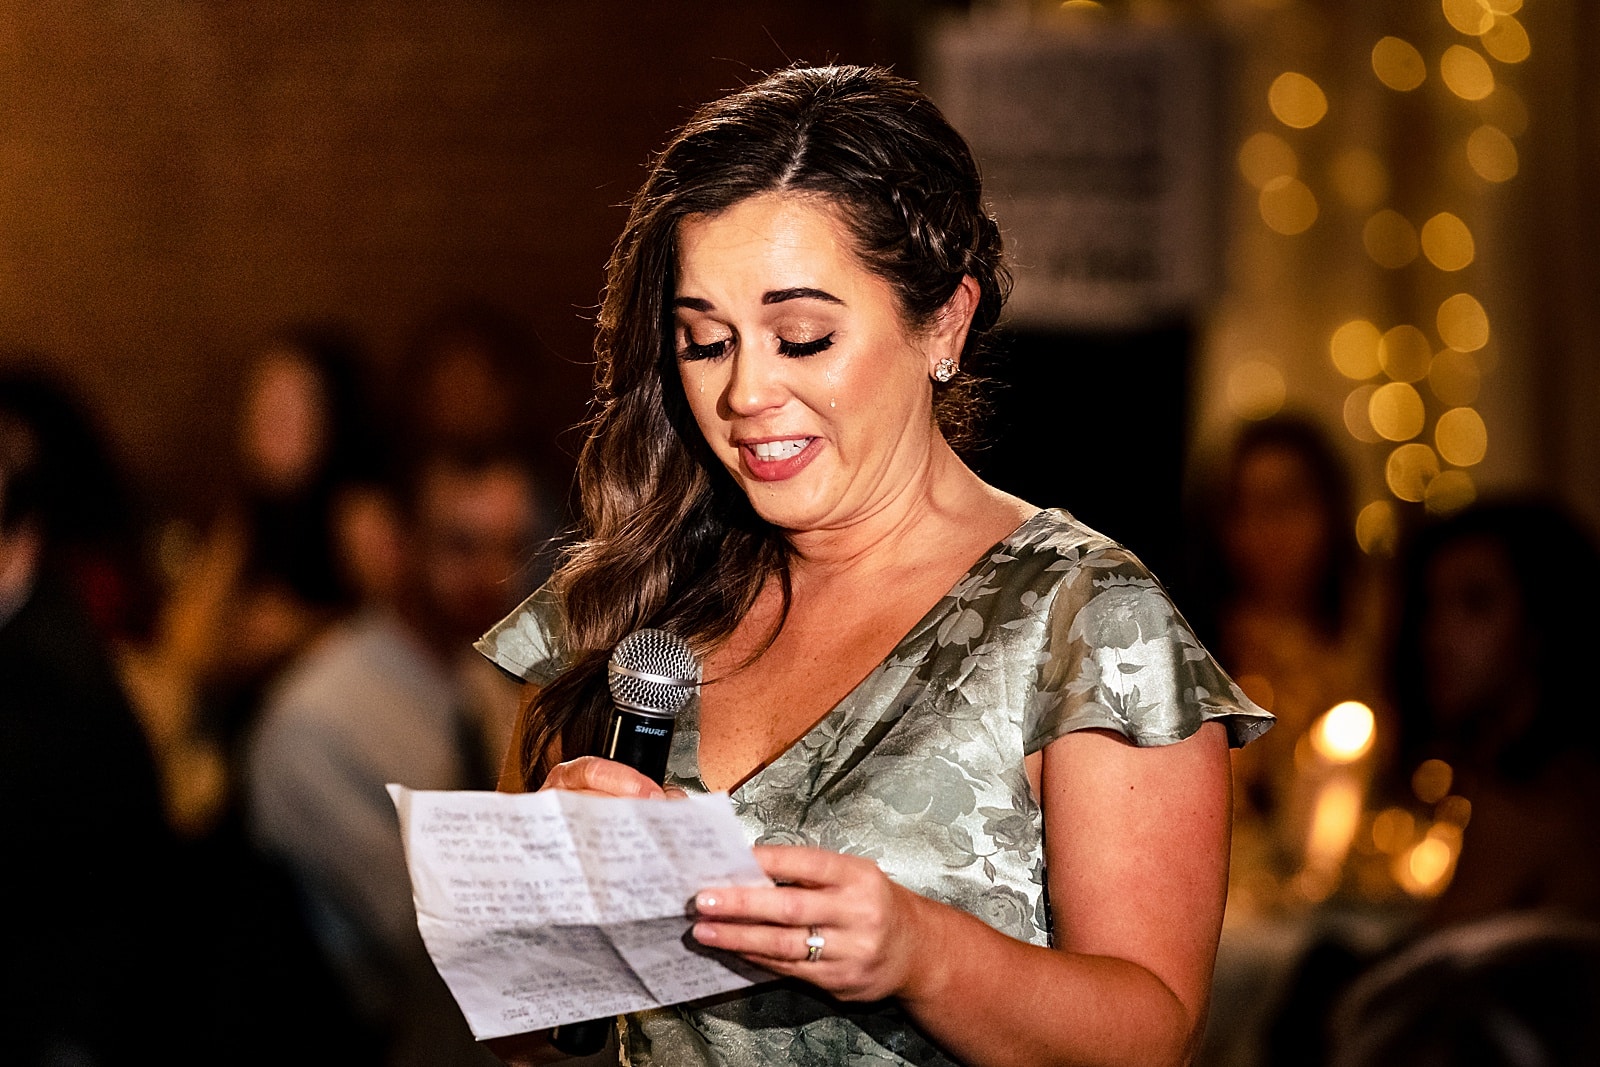 emotional and personal wedding toasts are the best